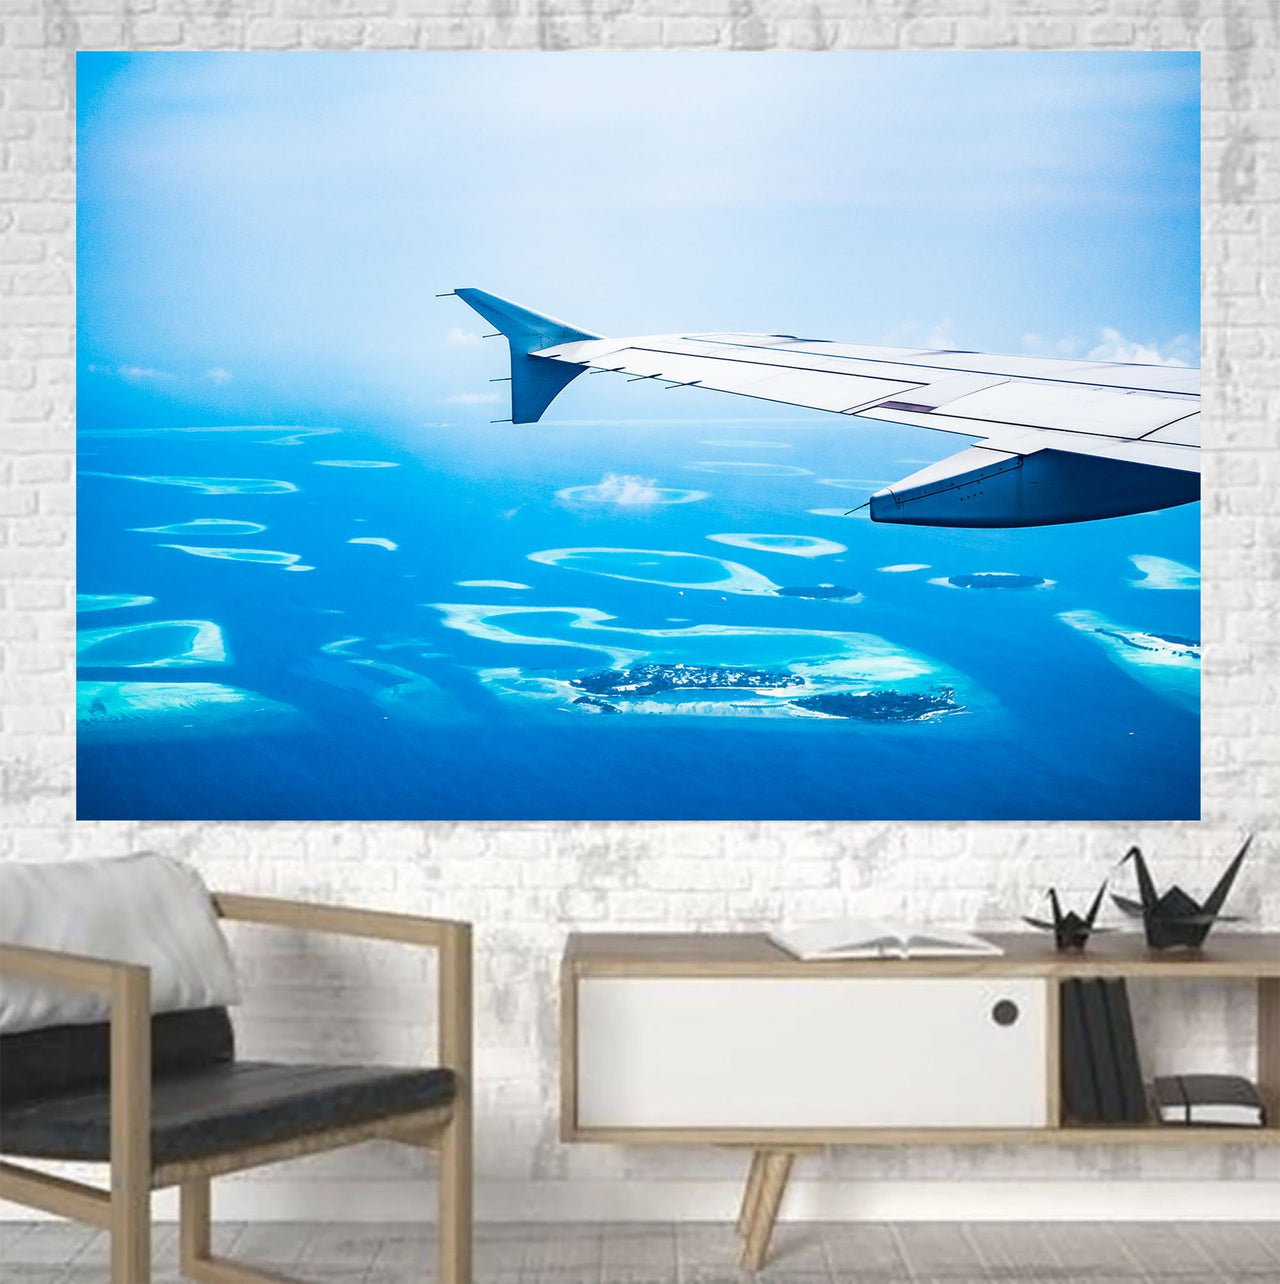 Outstanding View Through Airplane Wing Printed Canvas Posters (1 Piece) Aviation Shop 